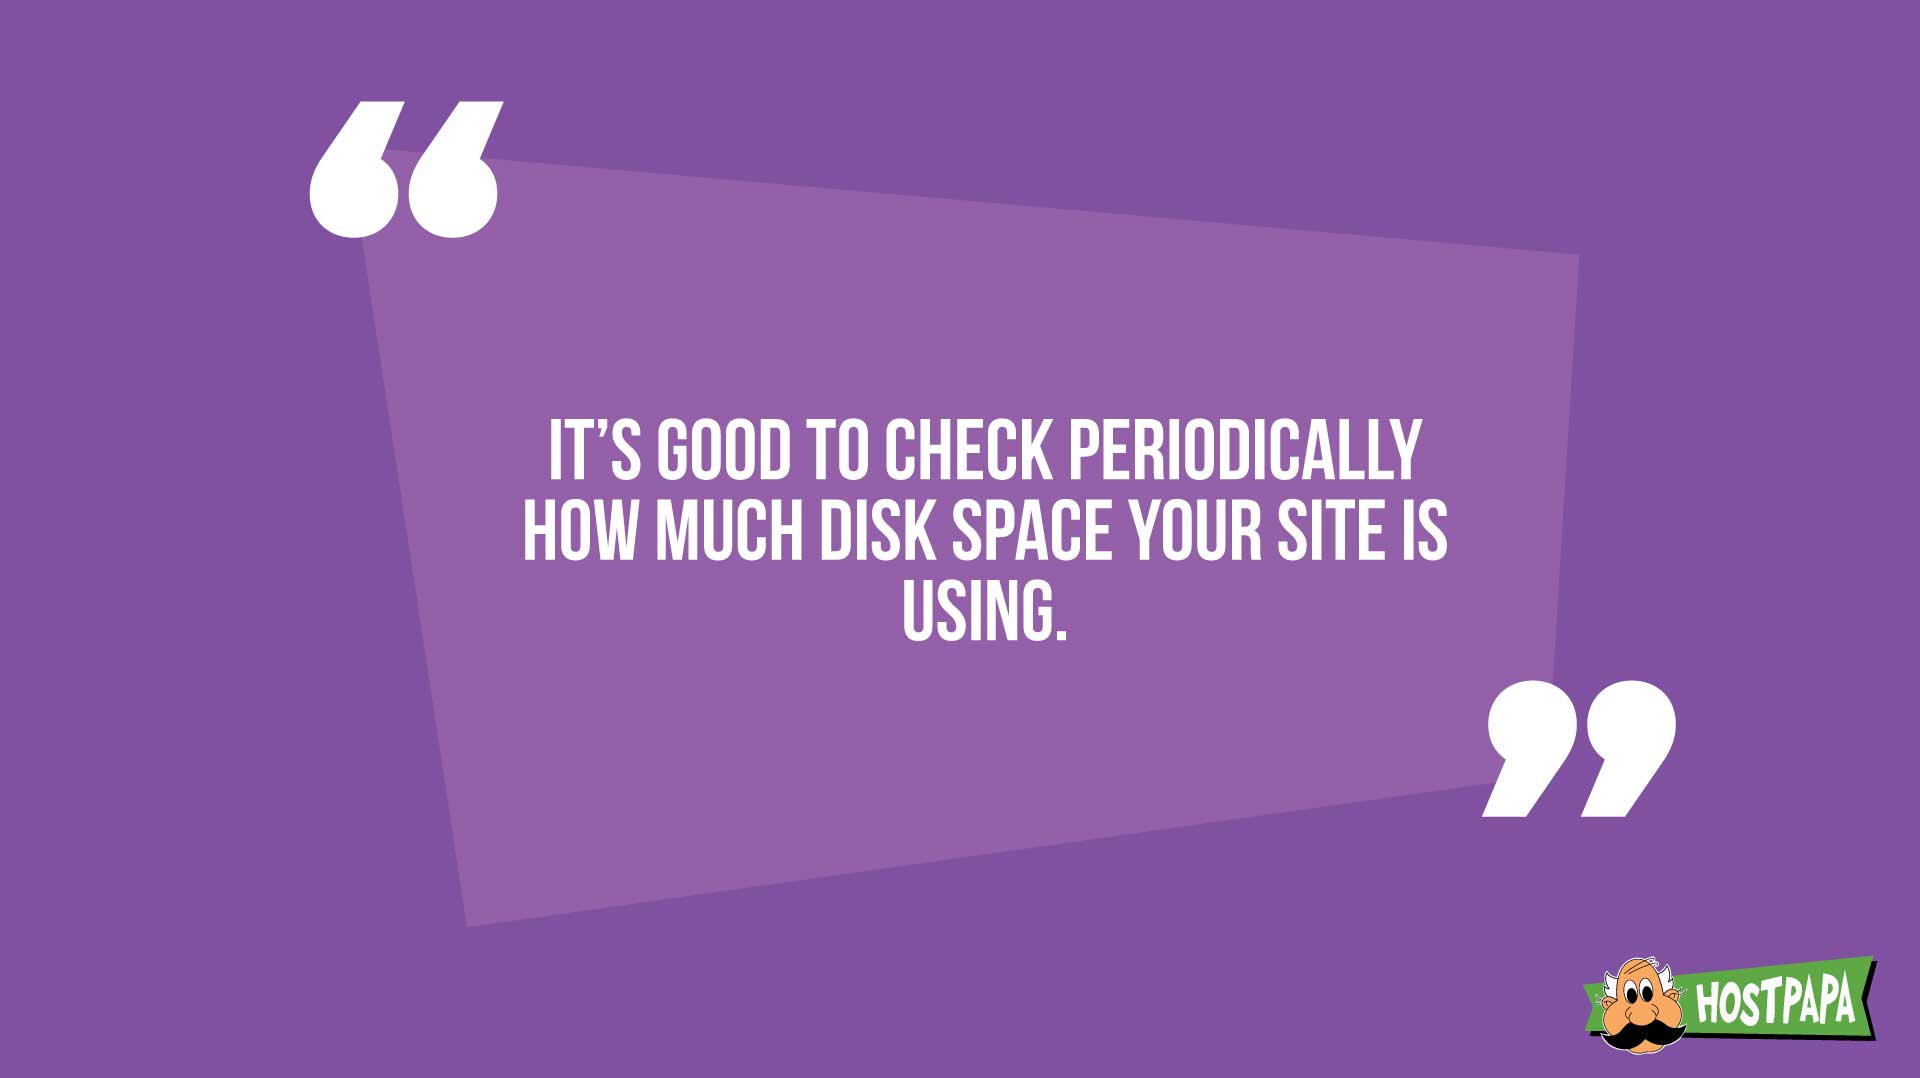 It's good to check periodically how much disk space your site is using